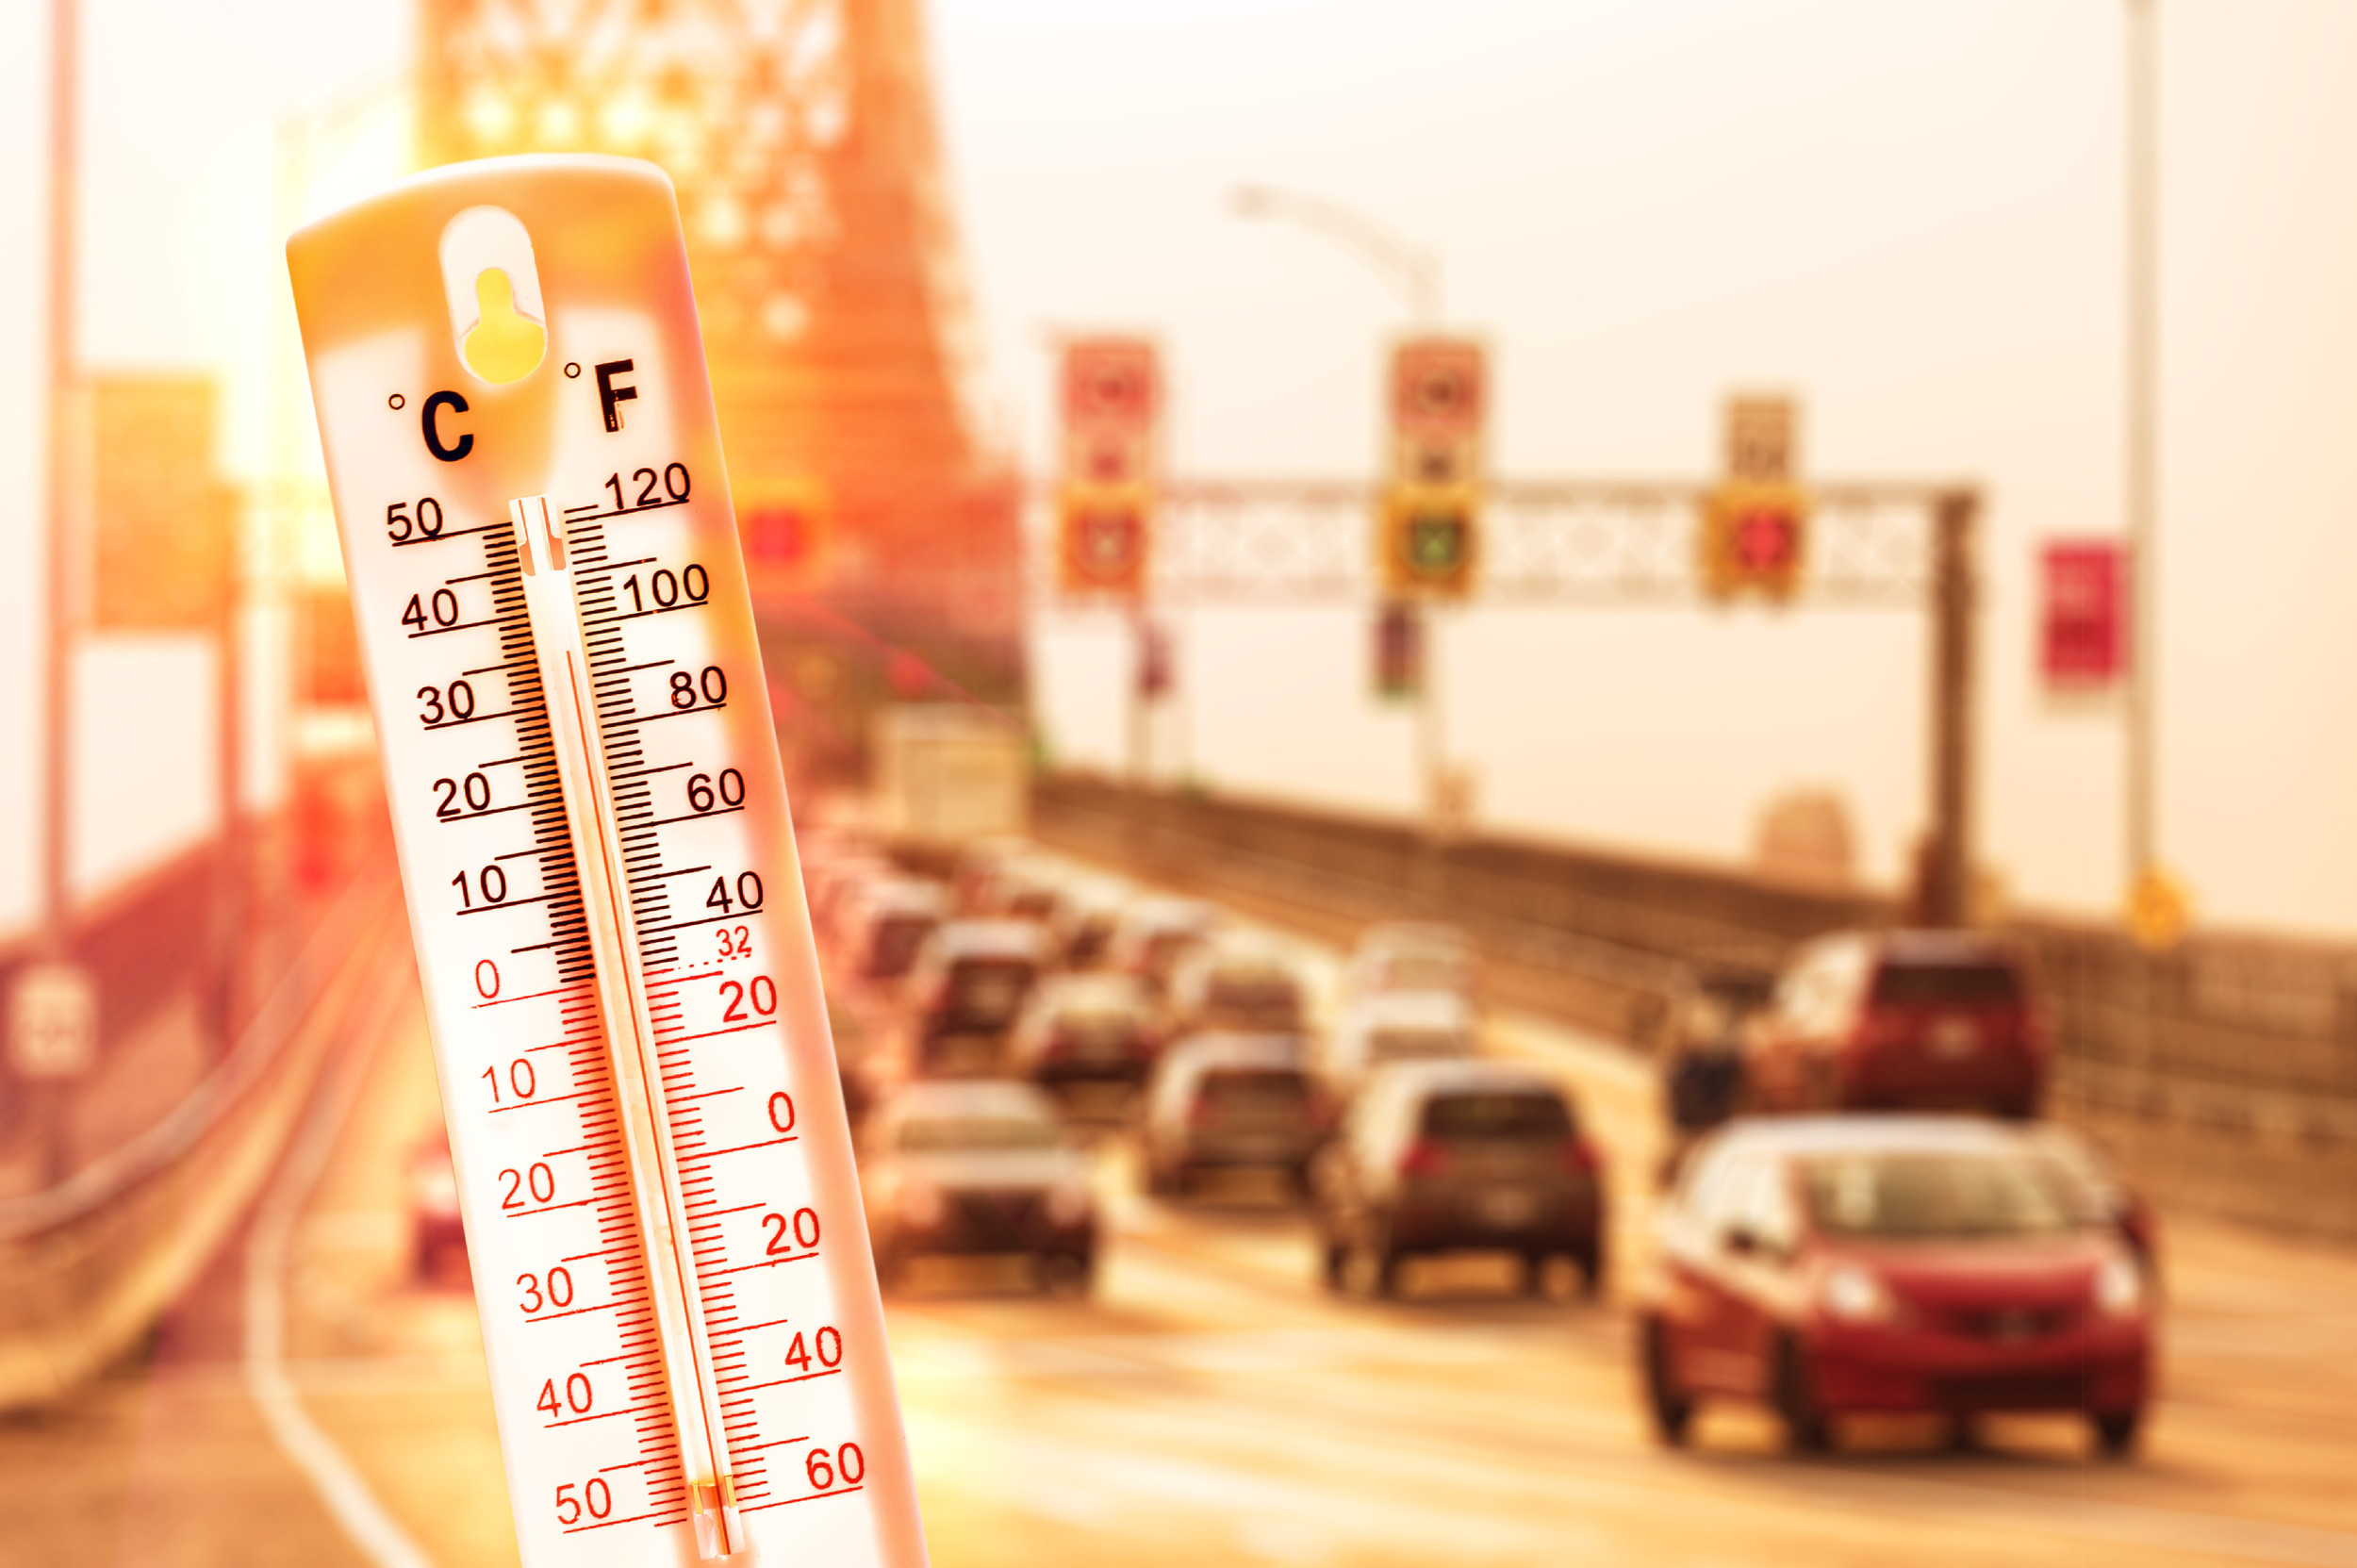 Thermometer in front of cars and traffic during heatwave in Montreal.